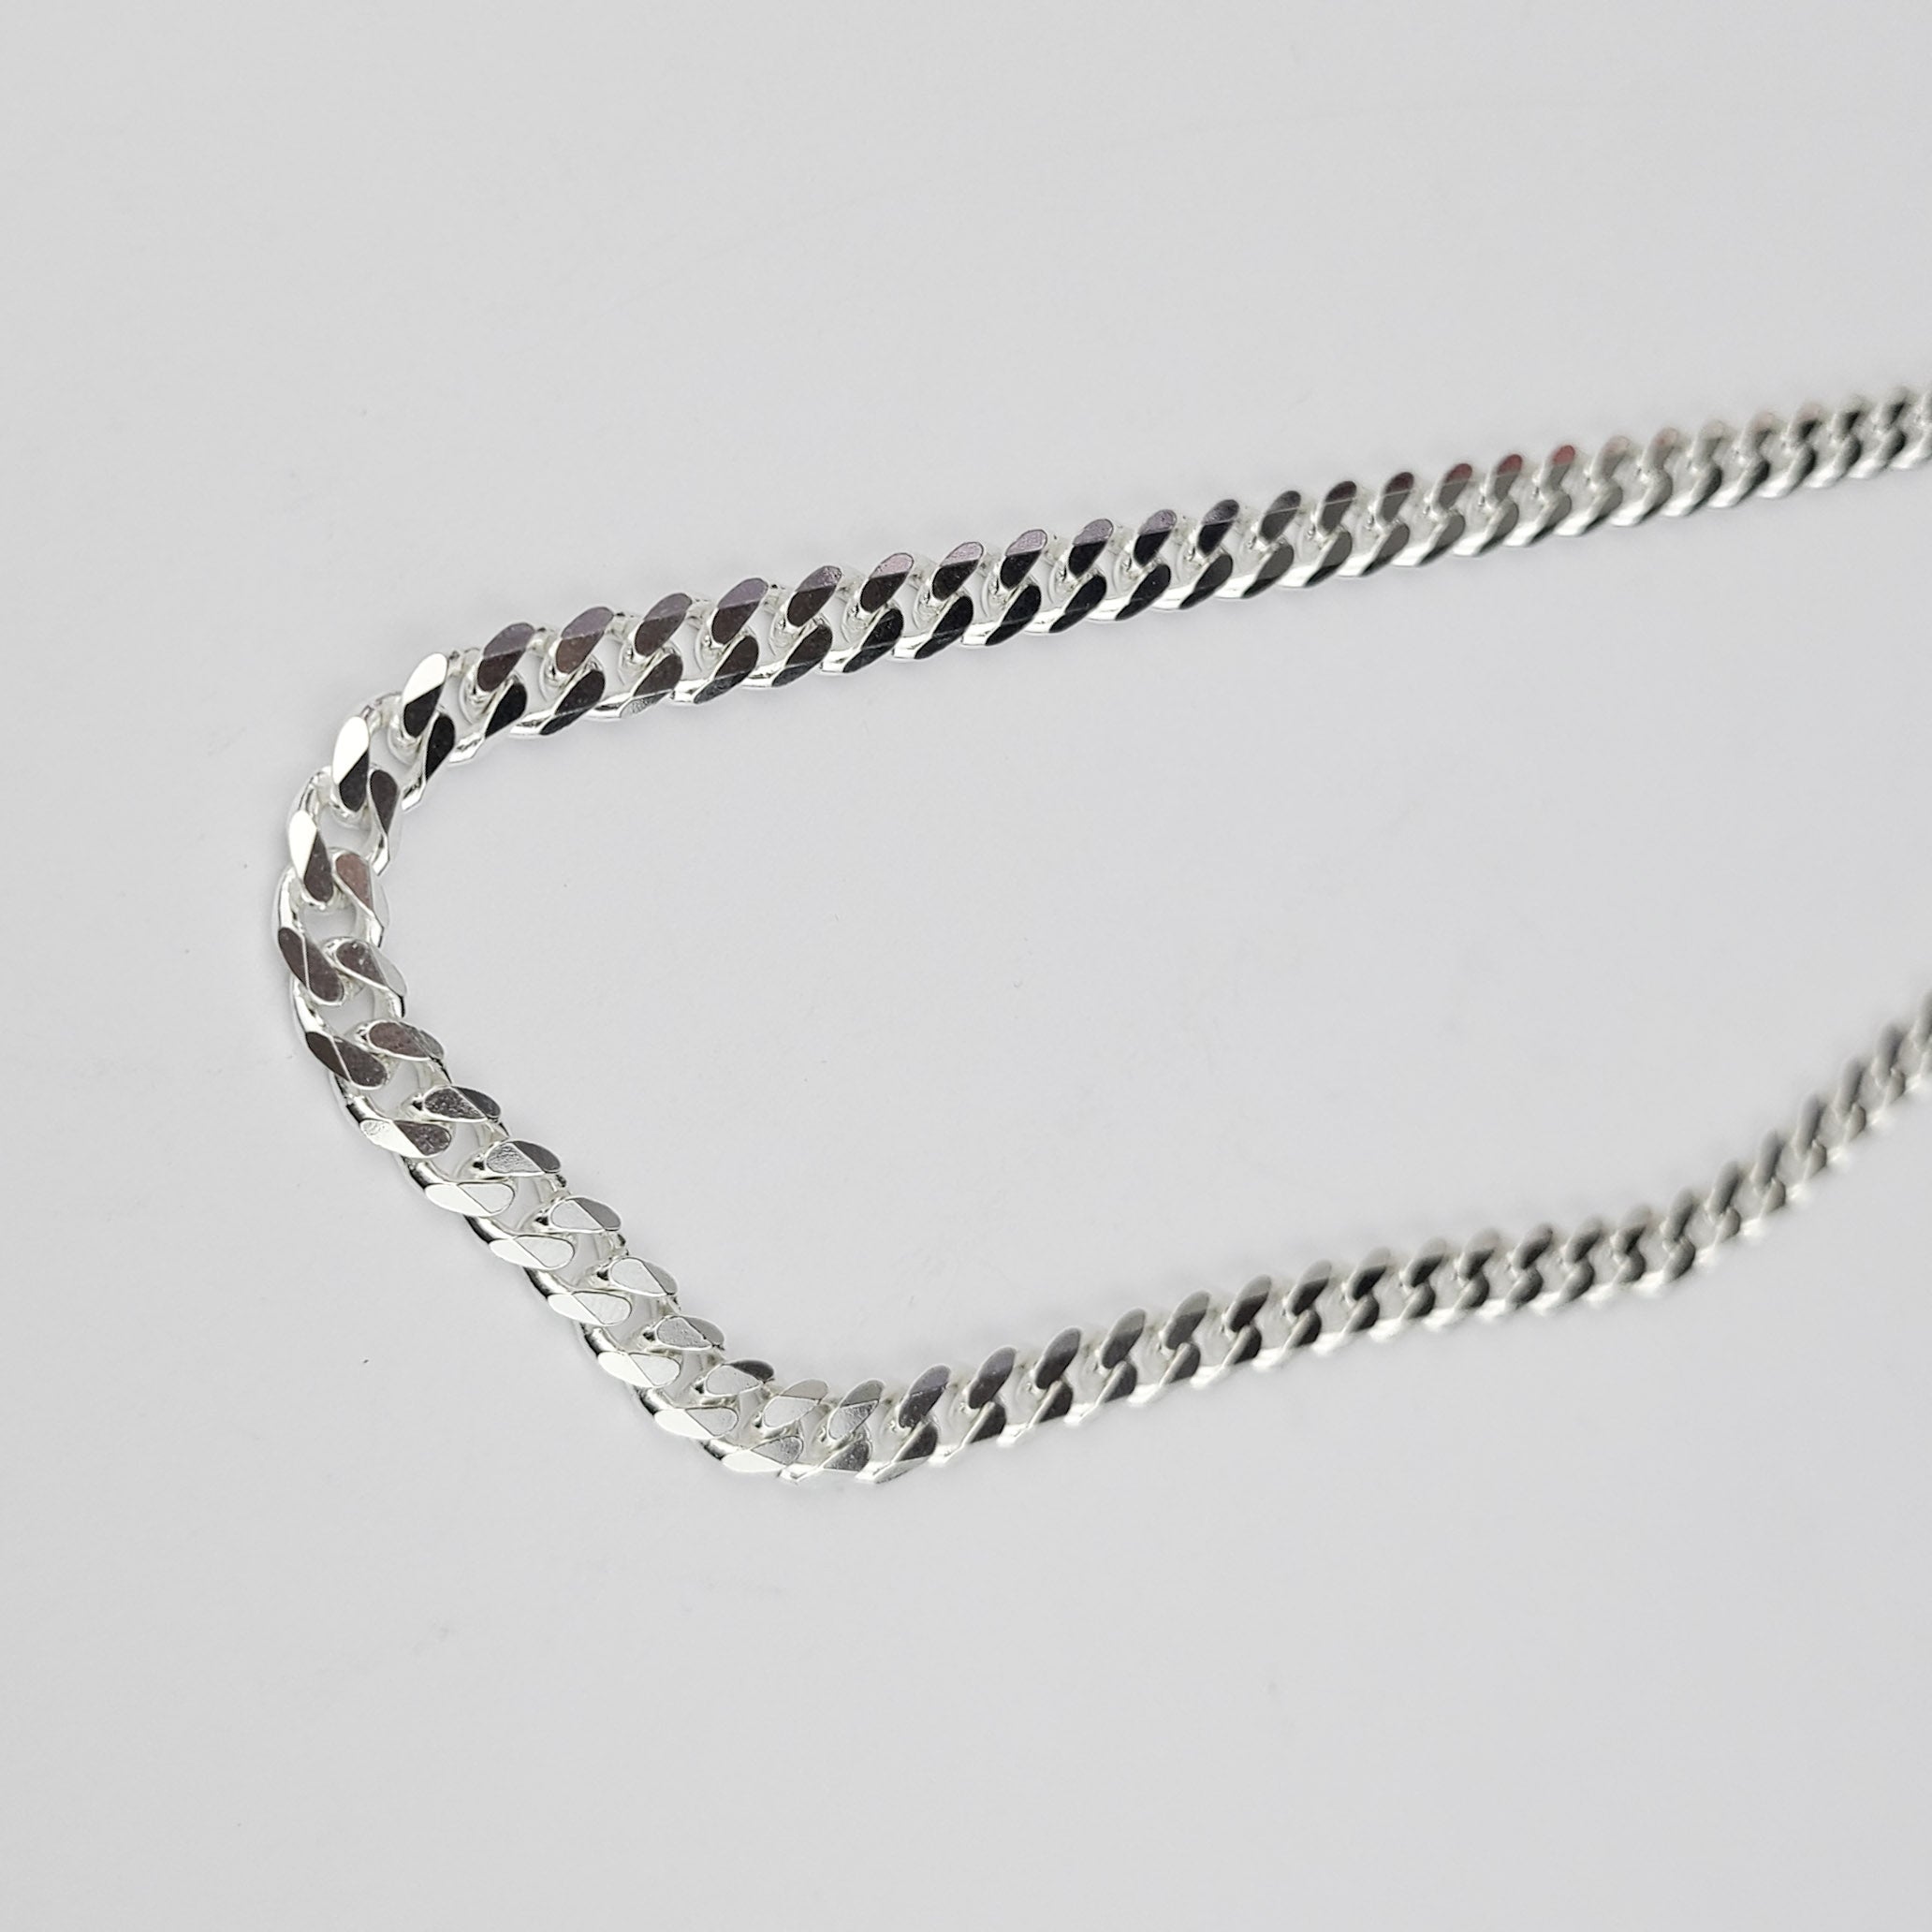 4 Mm Sterling Silver Curb Chain Necklace, Cuban Chain, Boyfriend Necklace, Mens  Necklace, Gift for Men, Gift for Her - Etsy